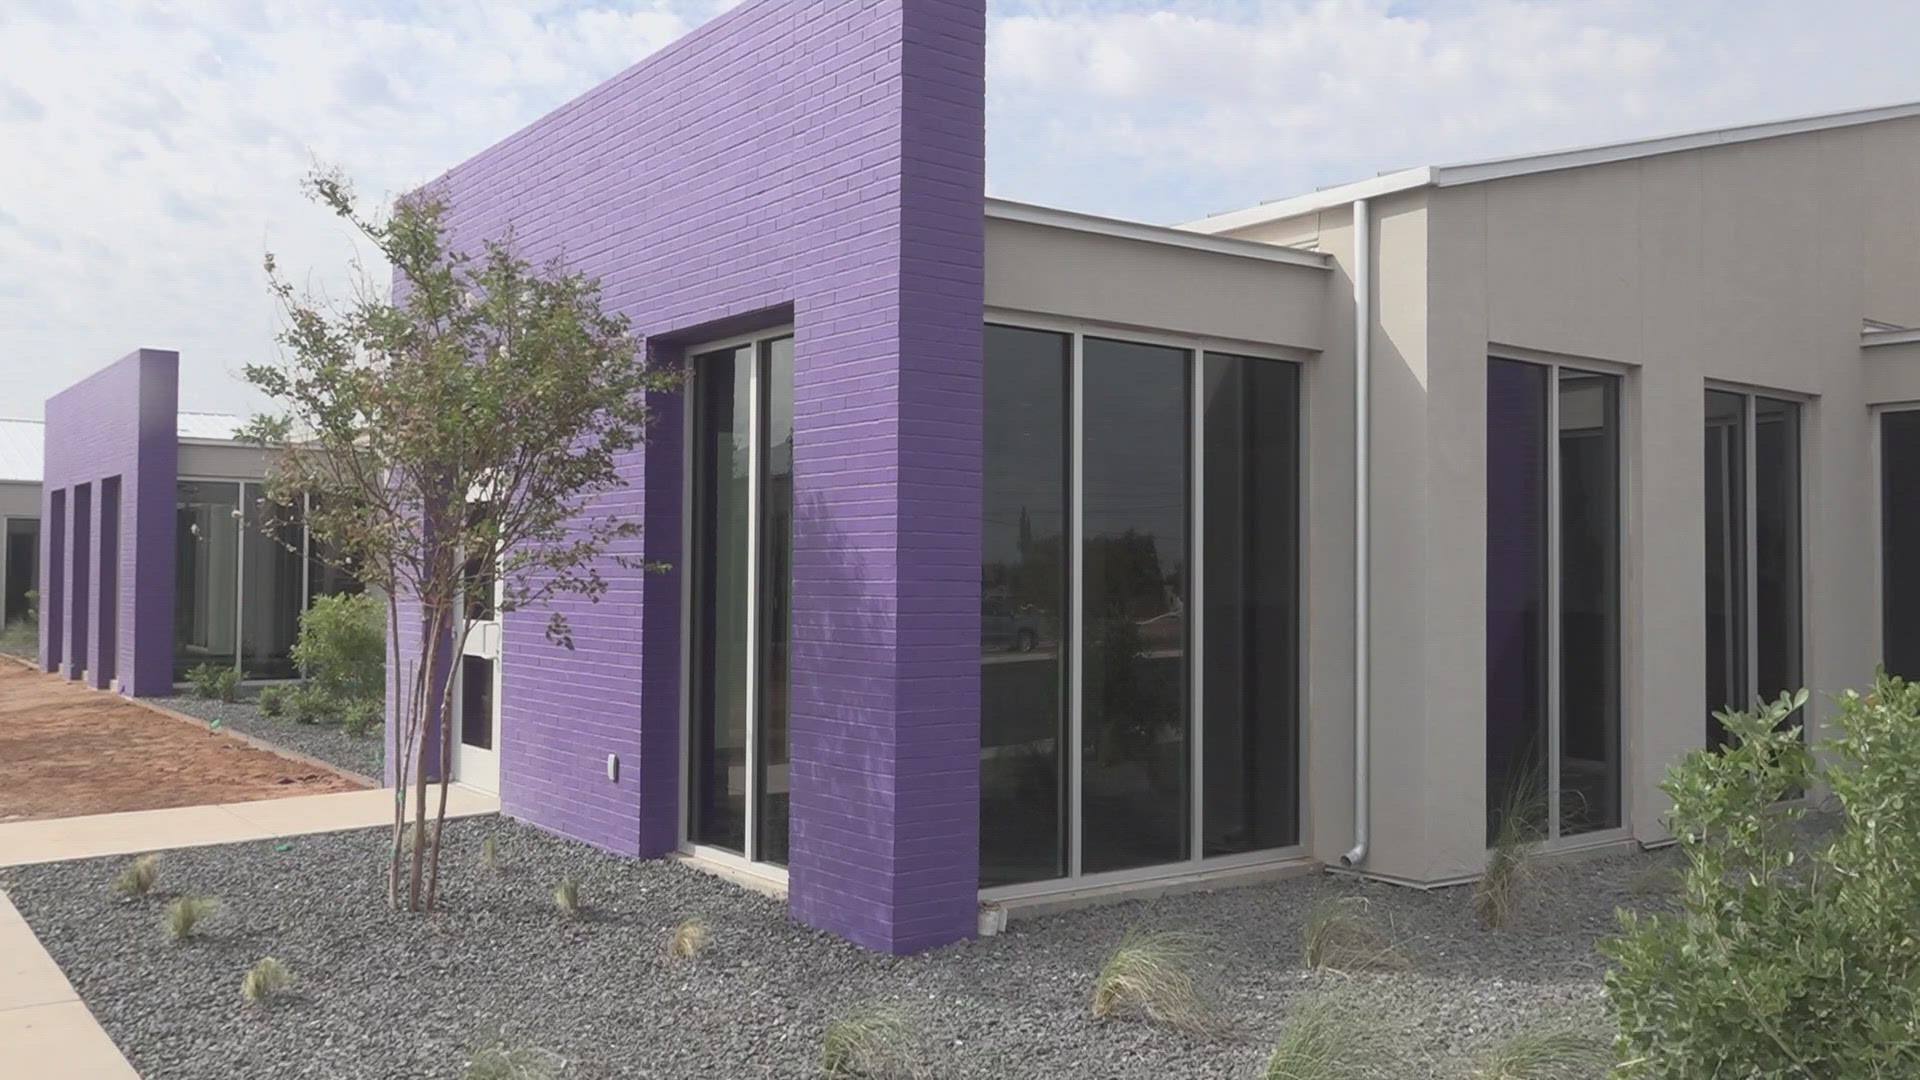 The new Safe Place of the Permian Basin building has doubled the capacity and will be able to serve even more clients with their new offices, kitchen & living space.